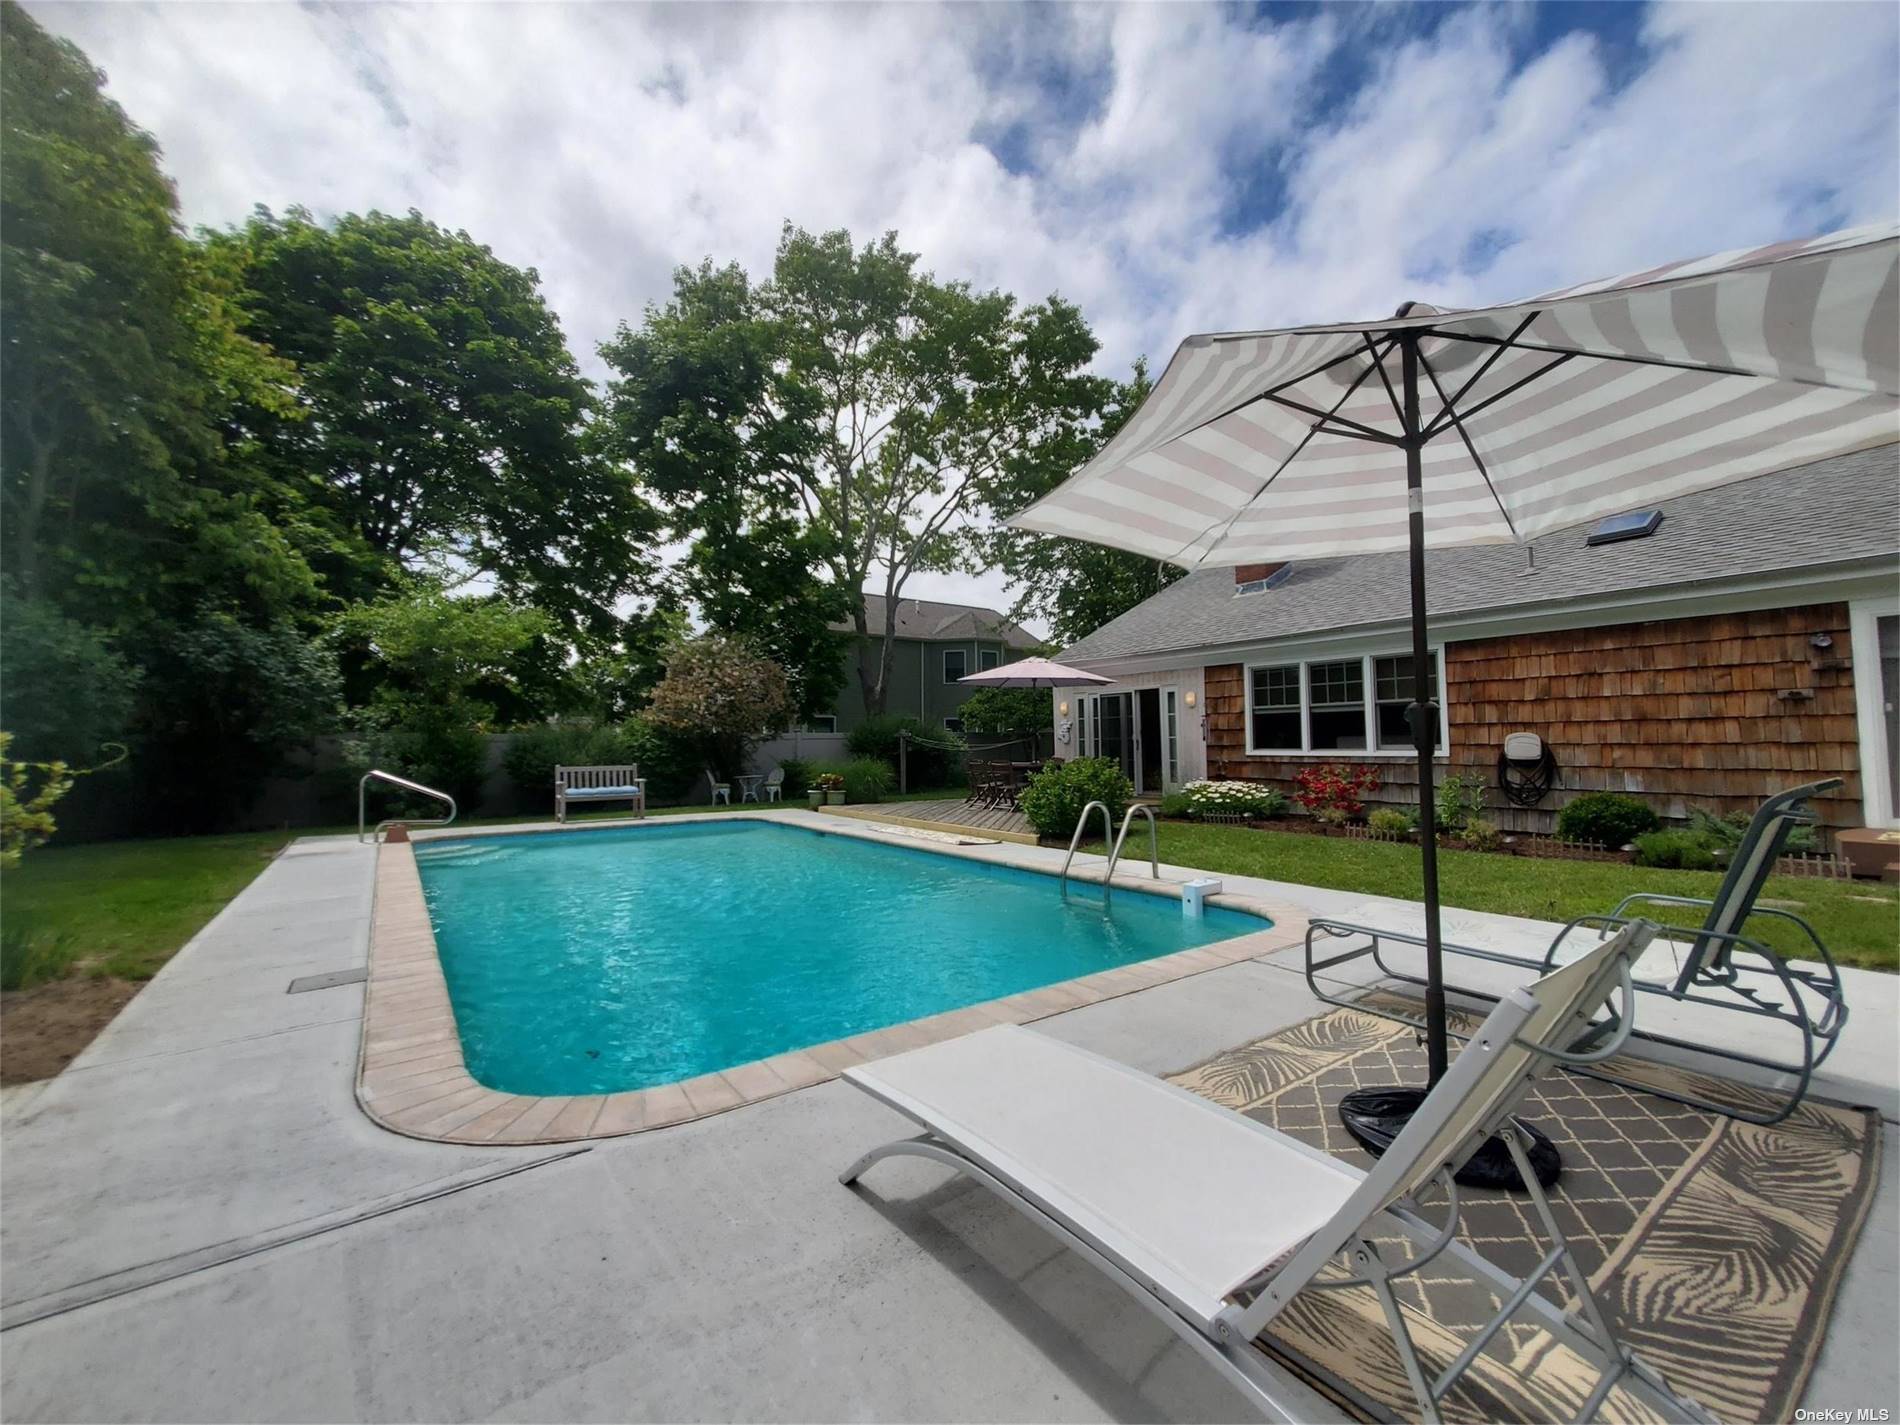 Your Hamptons July vacation awaits at this spacious 3 Bedroom Ranch home with a fabulous in ground pool.